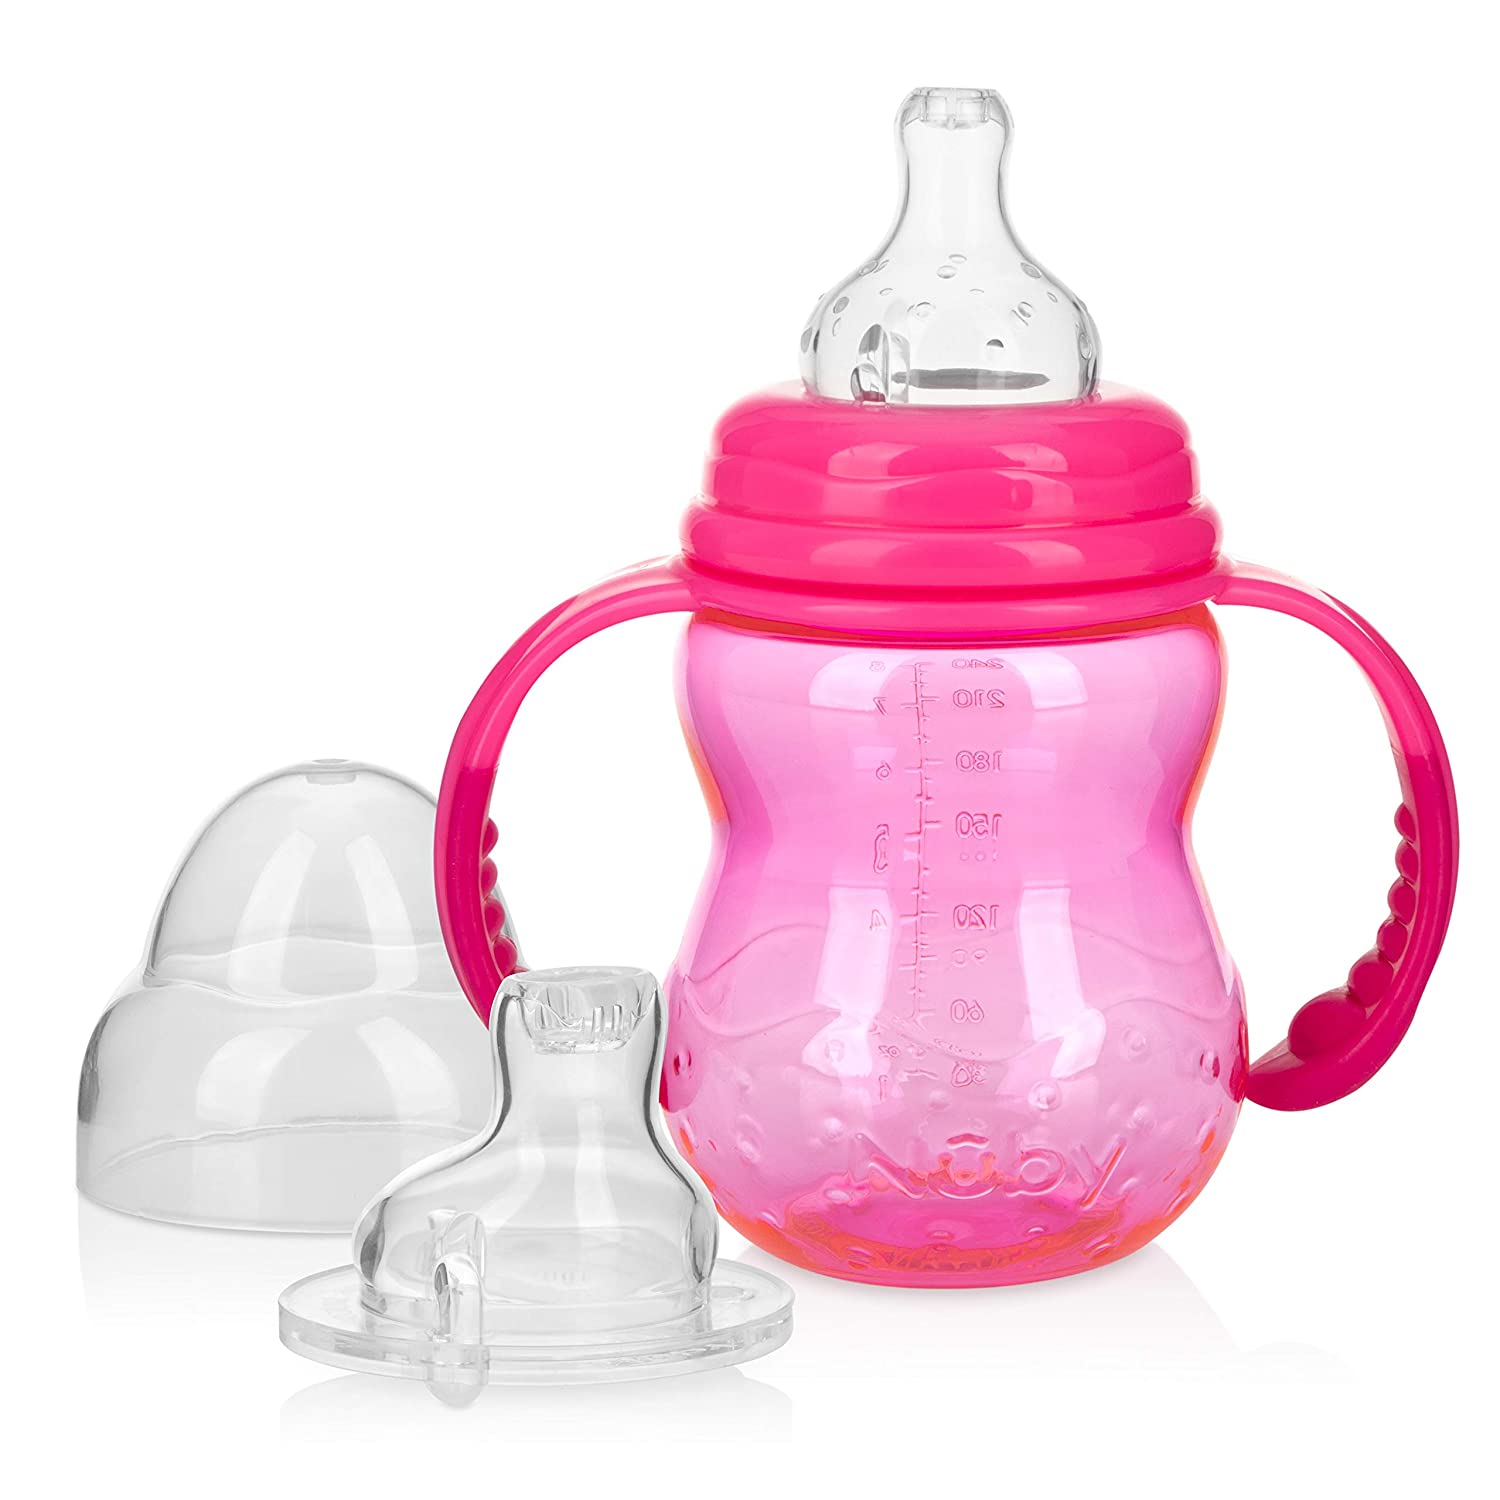 Nuby 3 Stage Grow Non-Drip Bottle, Assorted Colors - Shop Cups at H-E-B